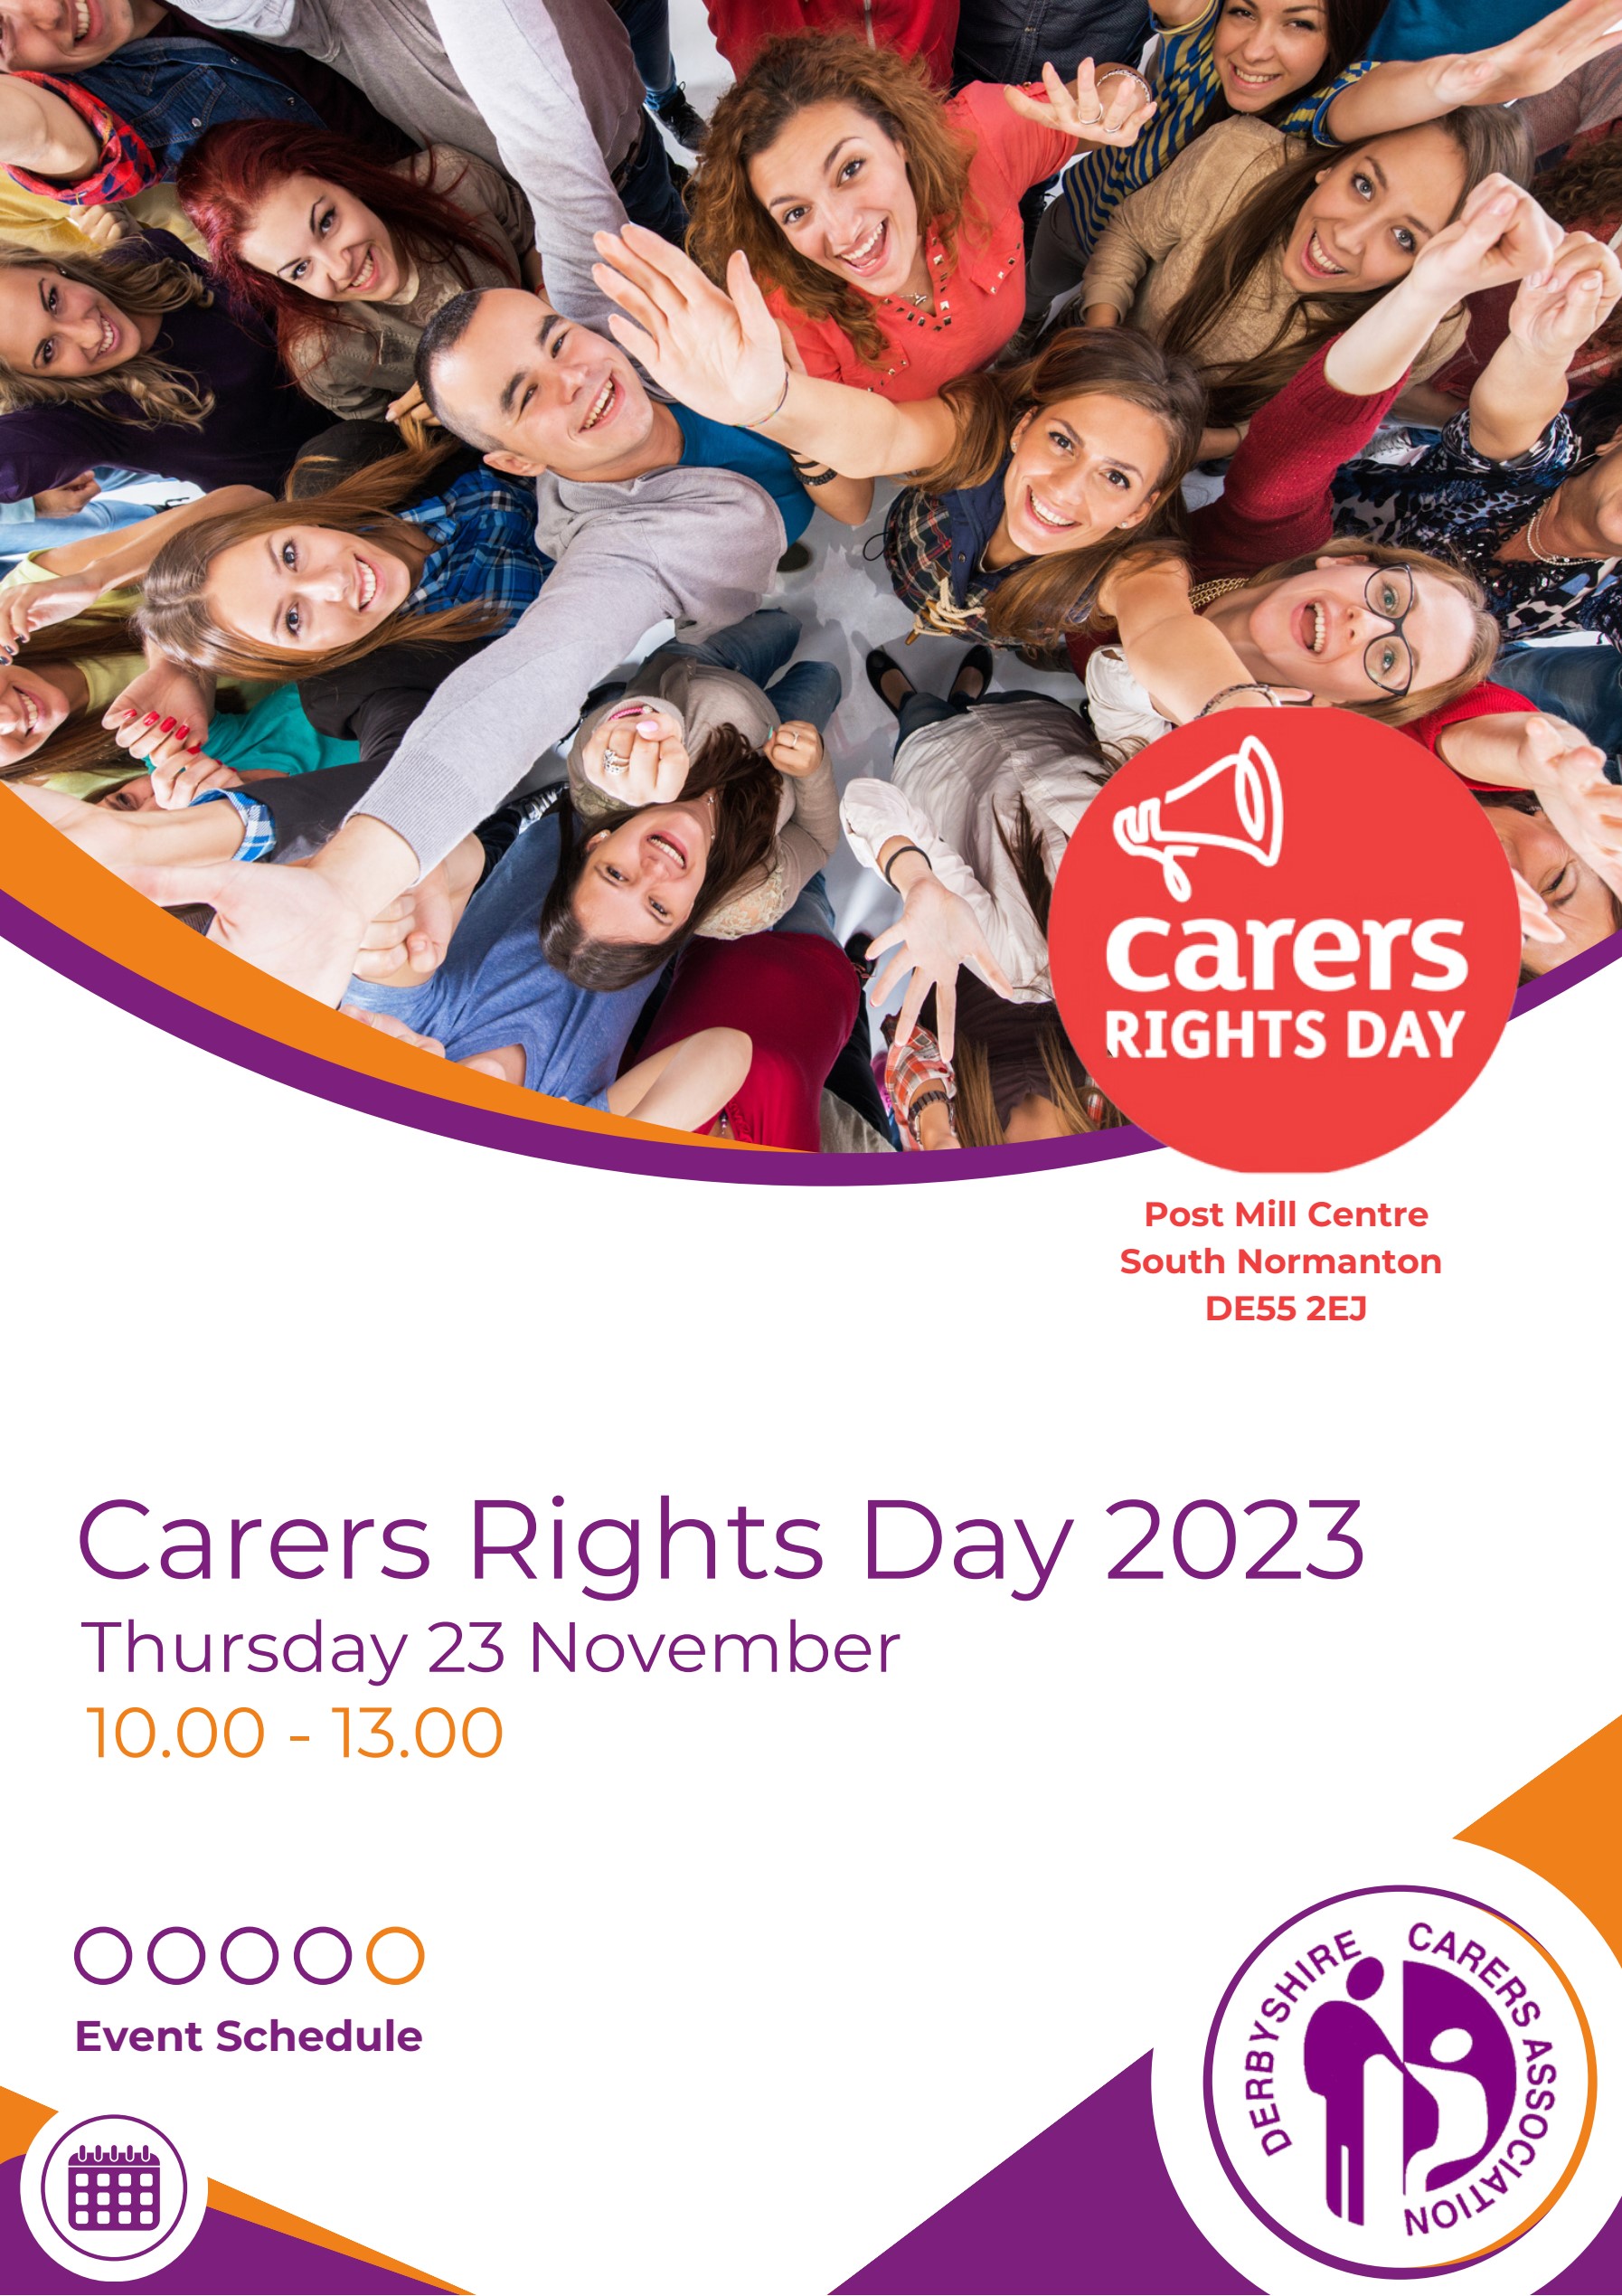 carers rights day.jpg (732 KB)